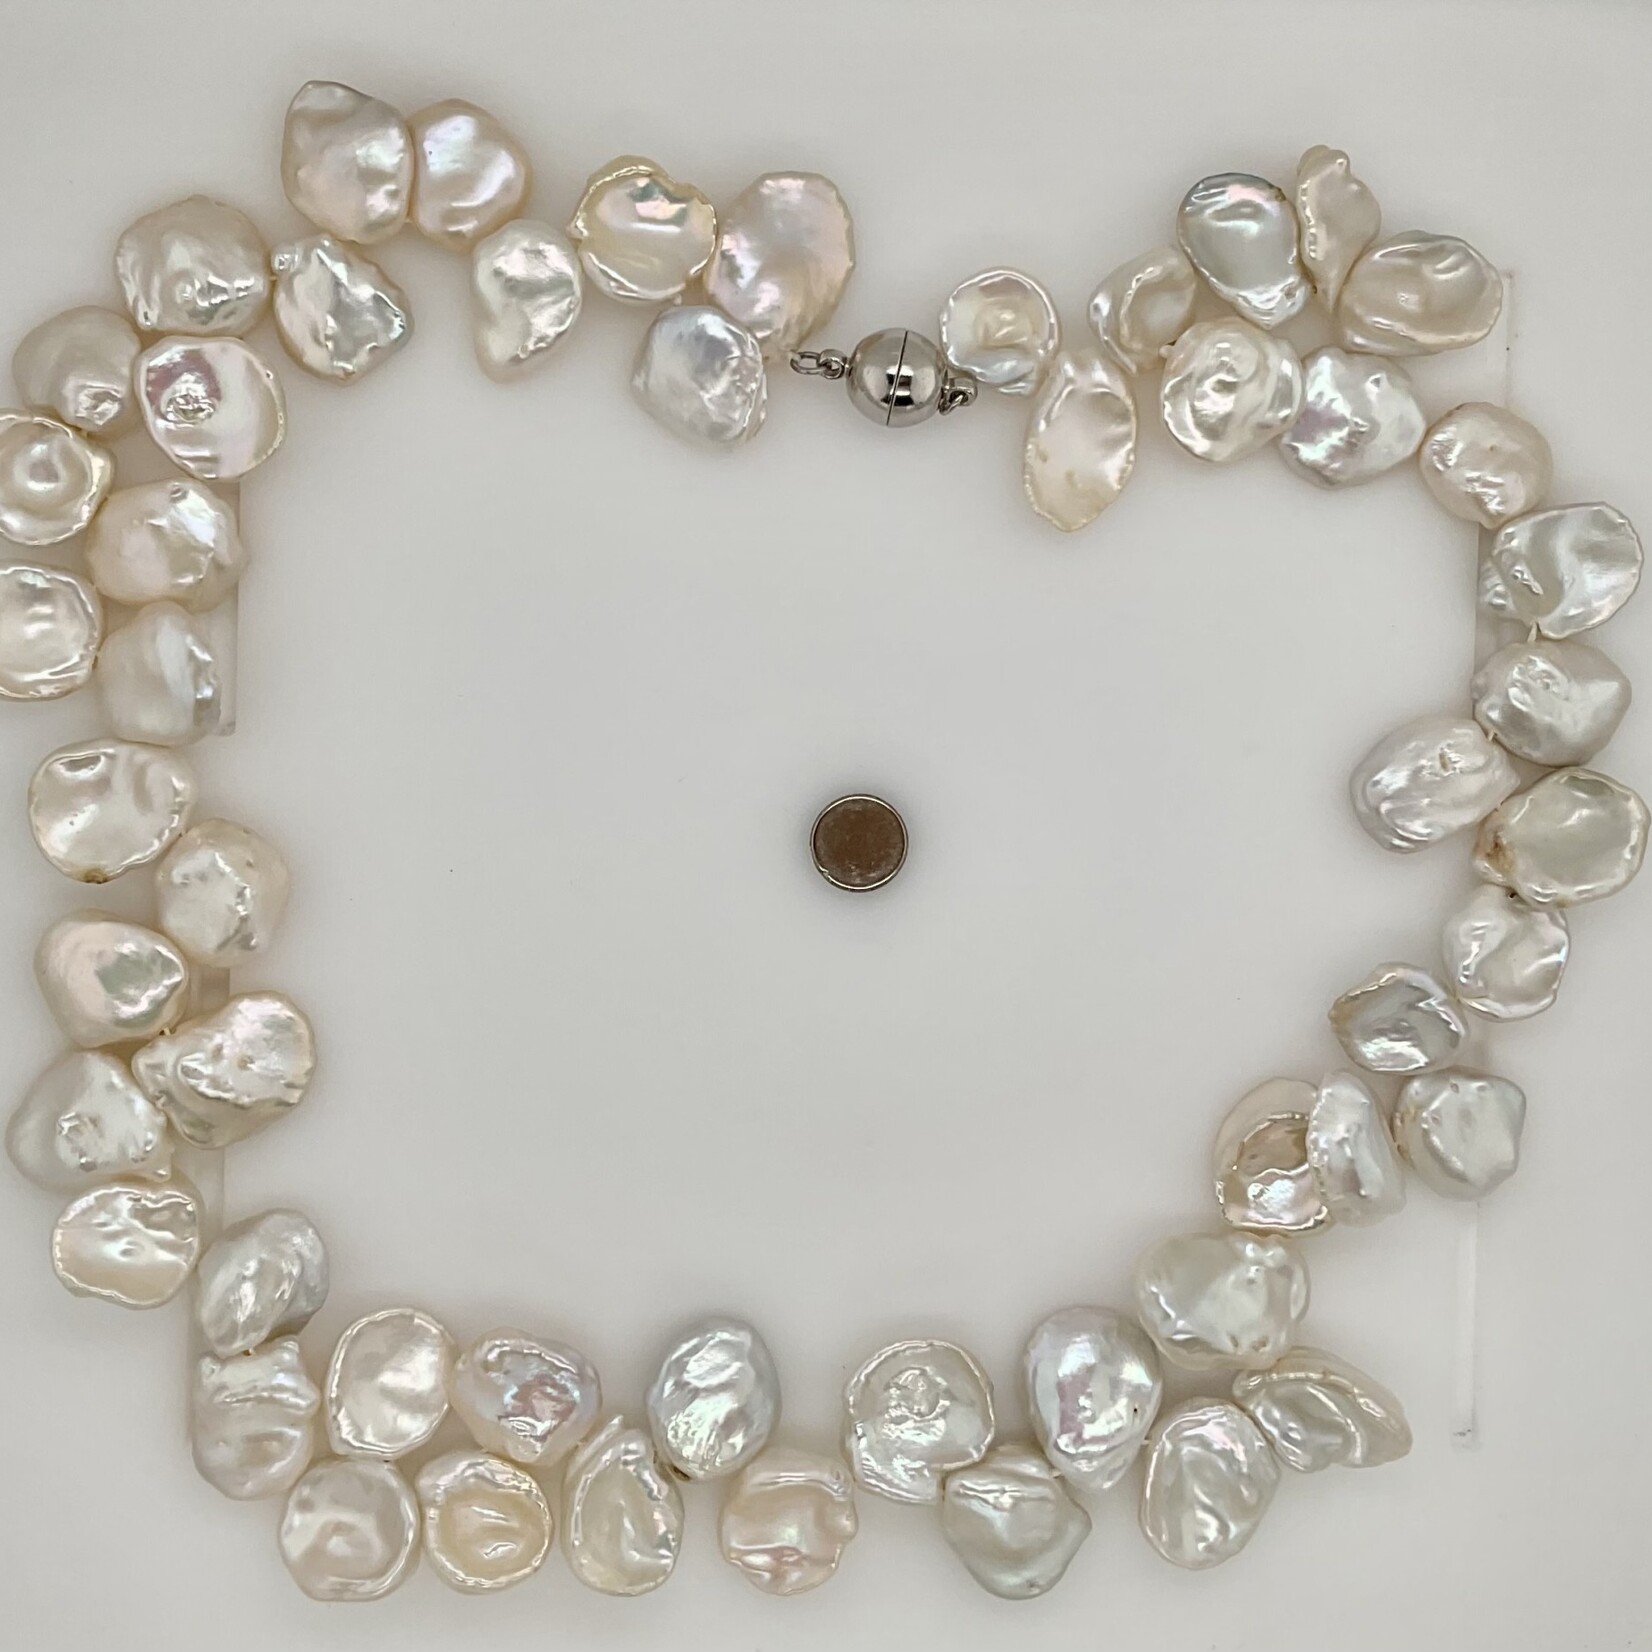 Keshi Cultured Pearl Necklace 18"